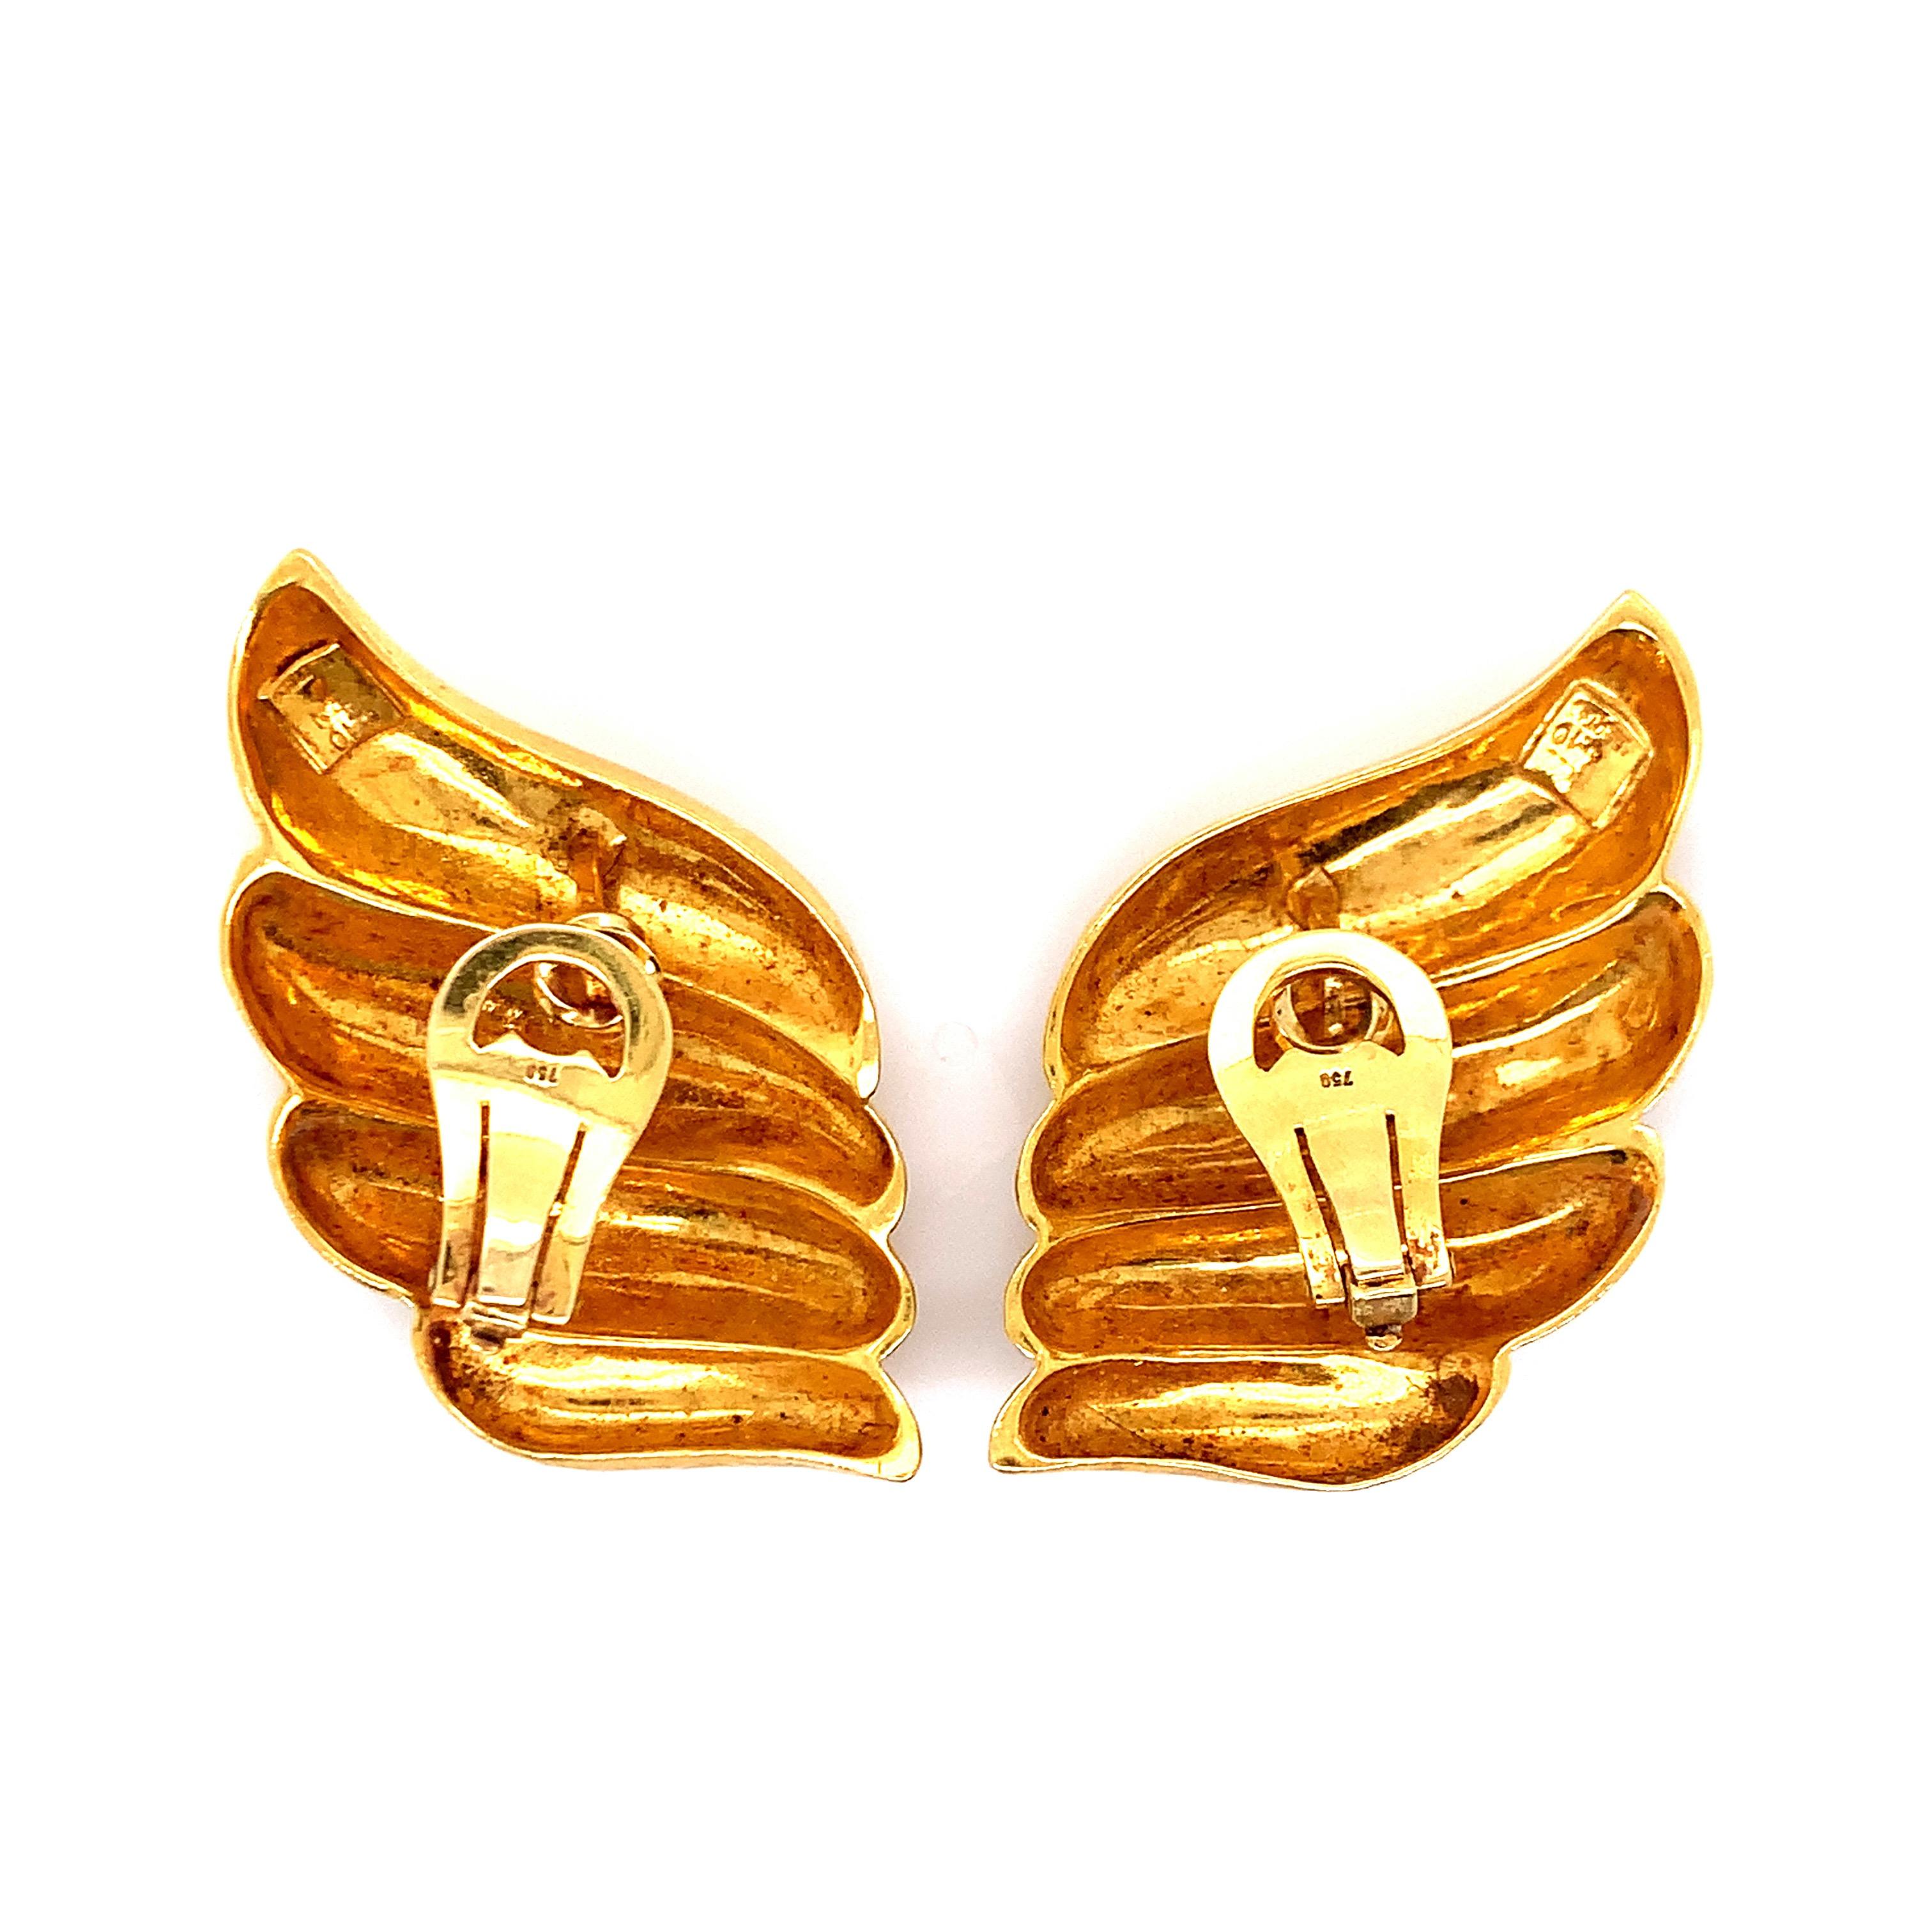 A pair of 22 karat gold ear clips, with a weight of 33.7 grams. Signed Zolotas. 